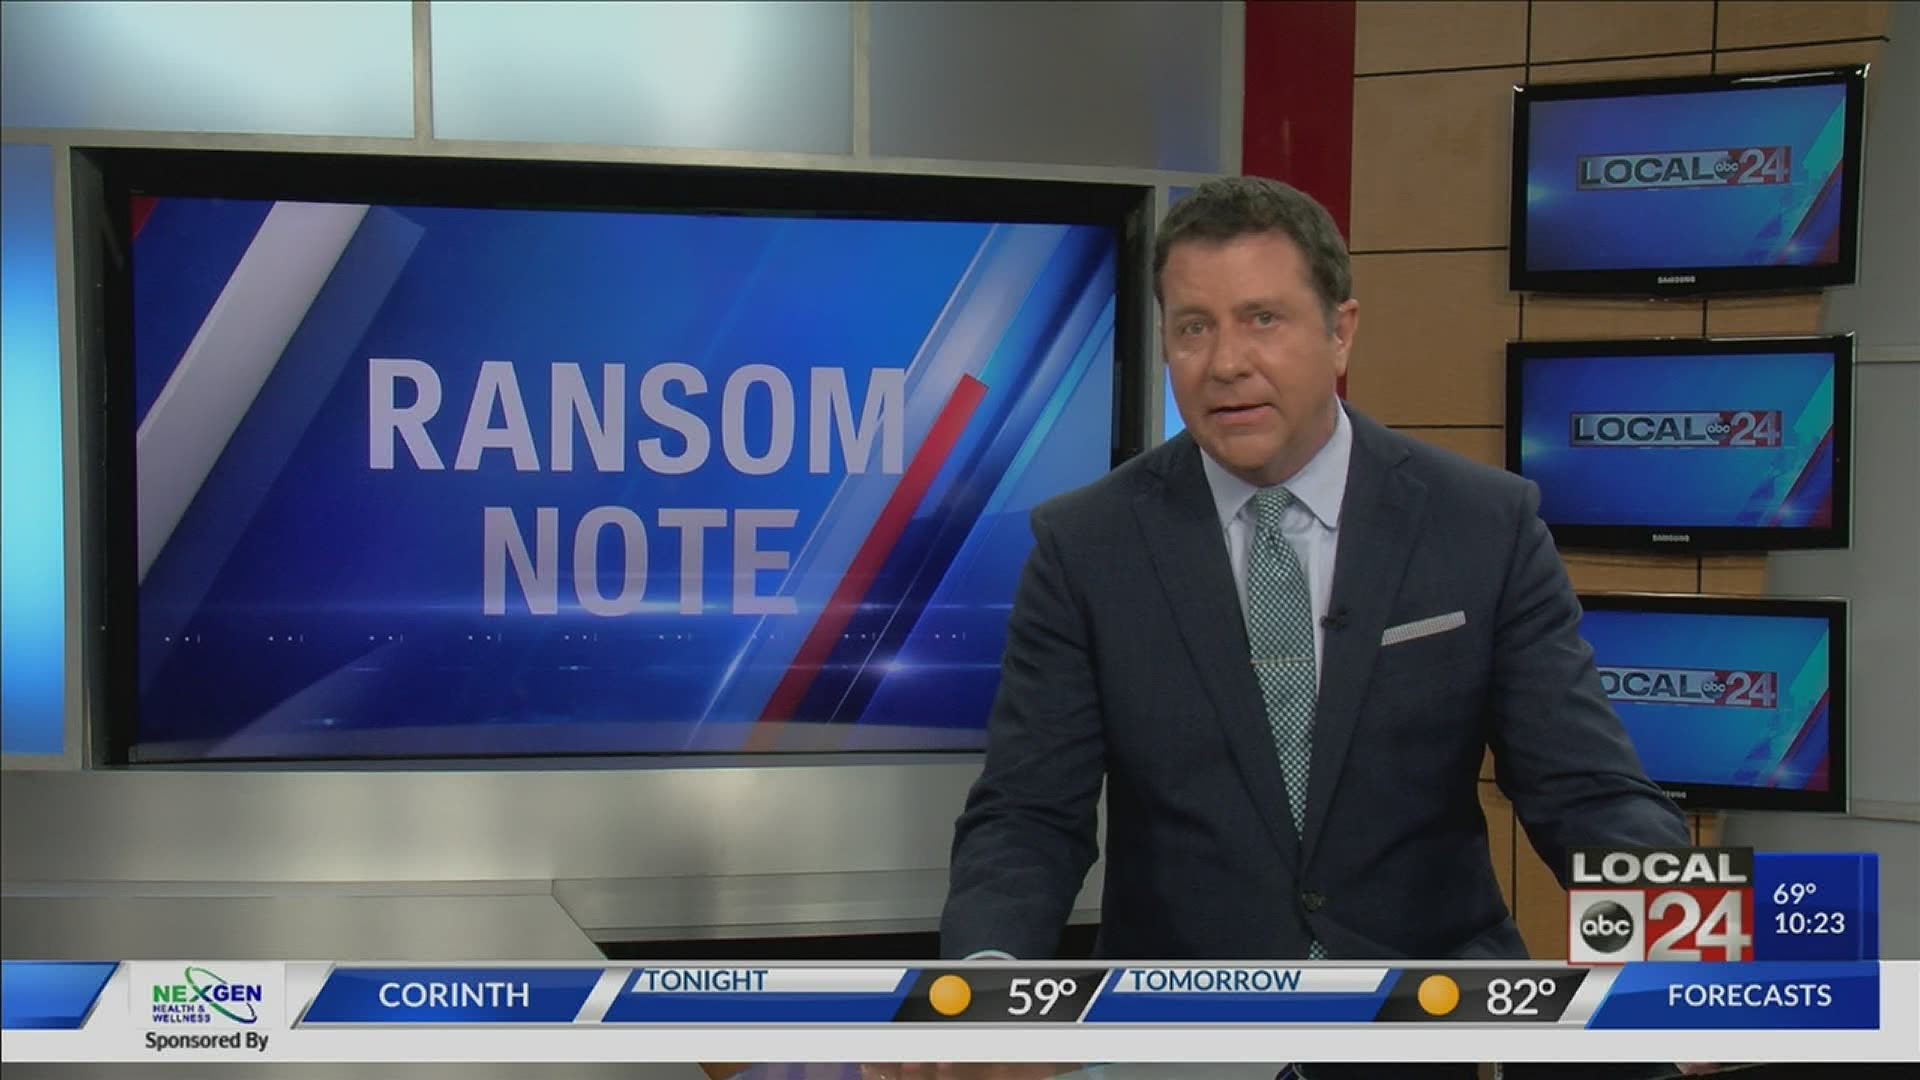 “Very few professions protect their bad apples as much as police do,” said Local 24 News anchor Richard Ransom in his “Ransom Note” segment